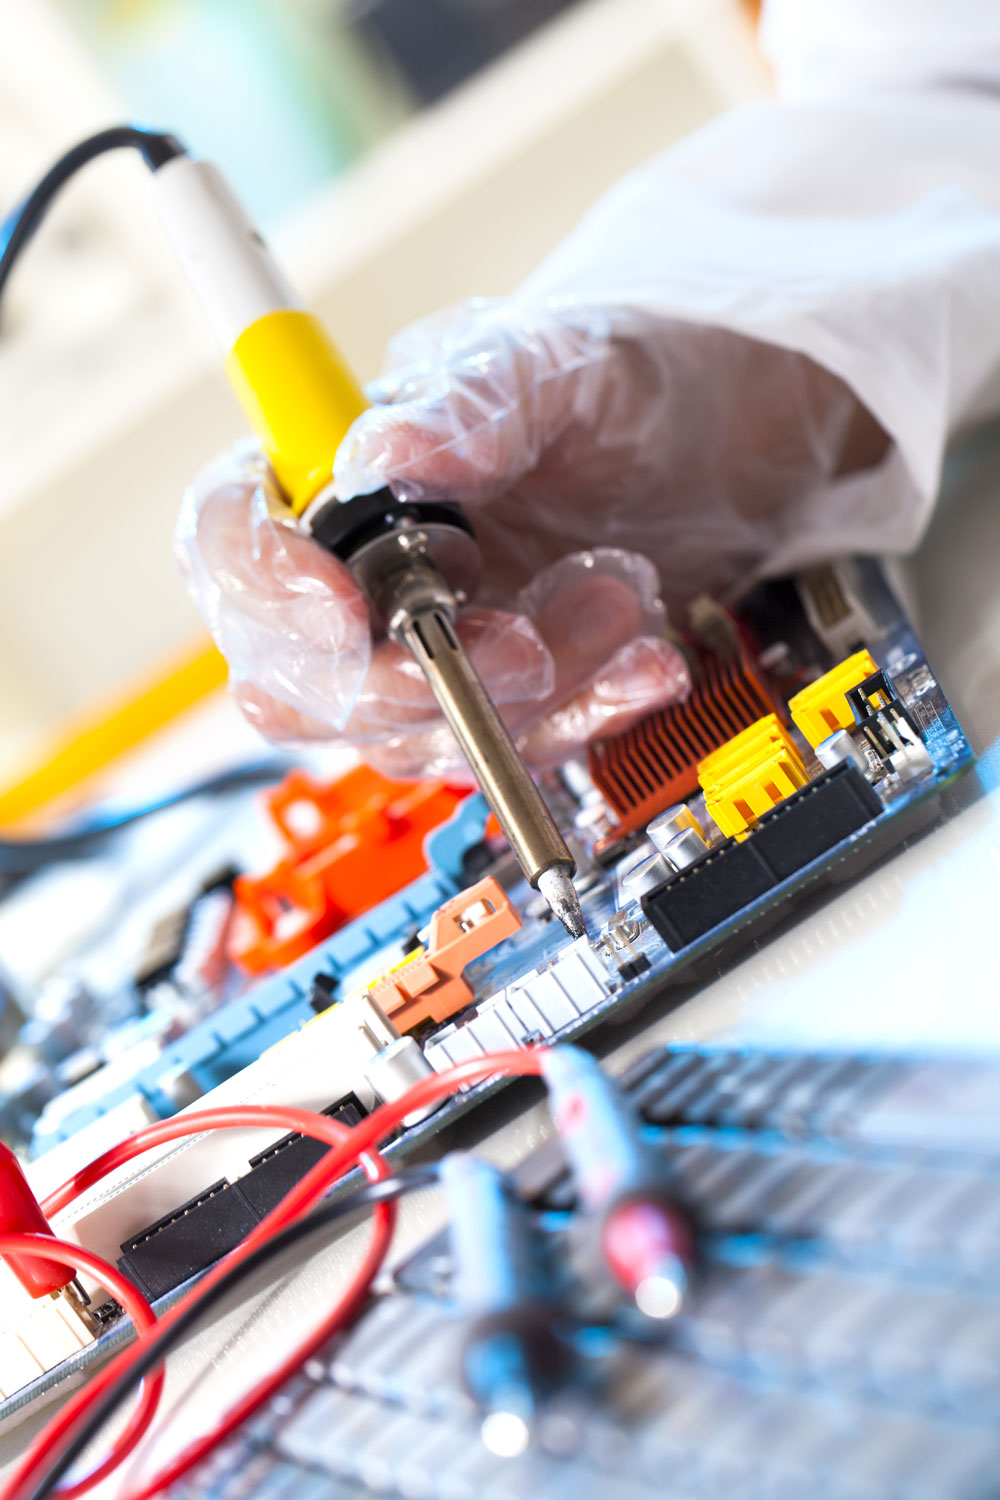 Insufficient Solder: Soldering Electronic Parts On a Printed Circuit Board